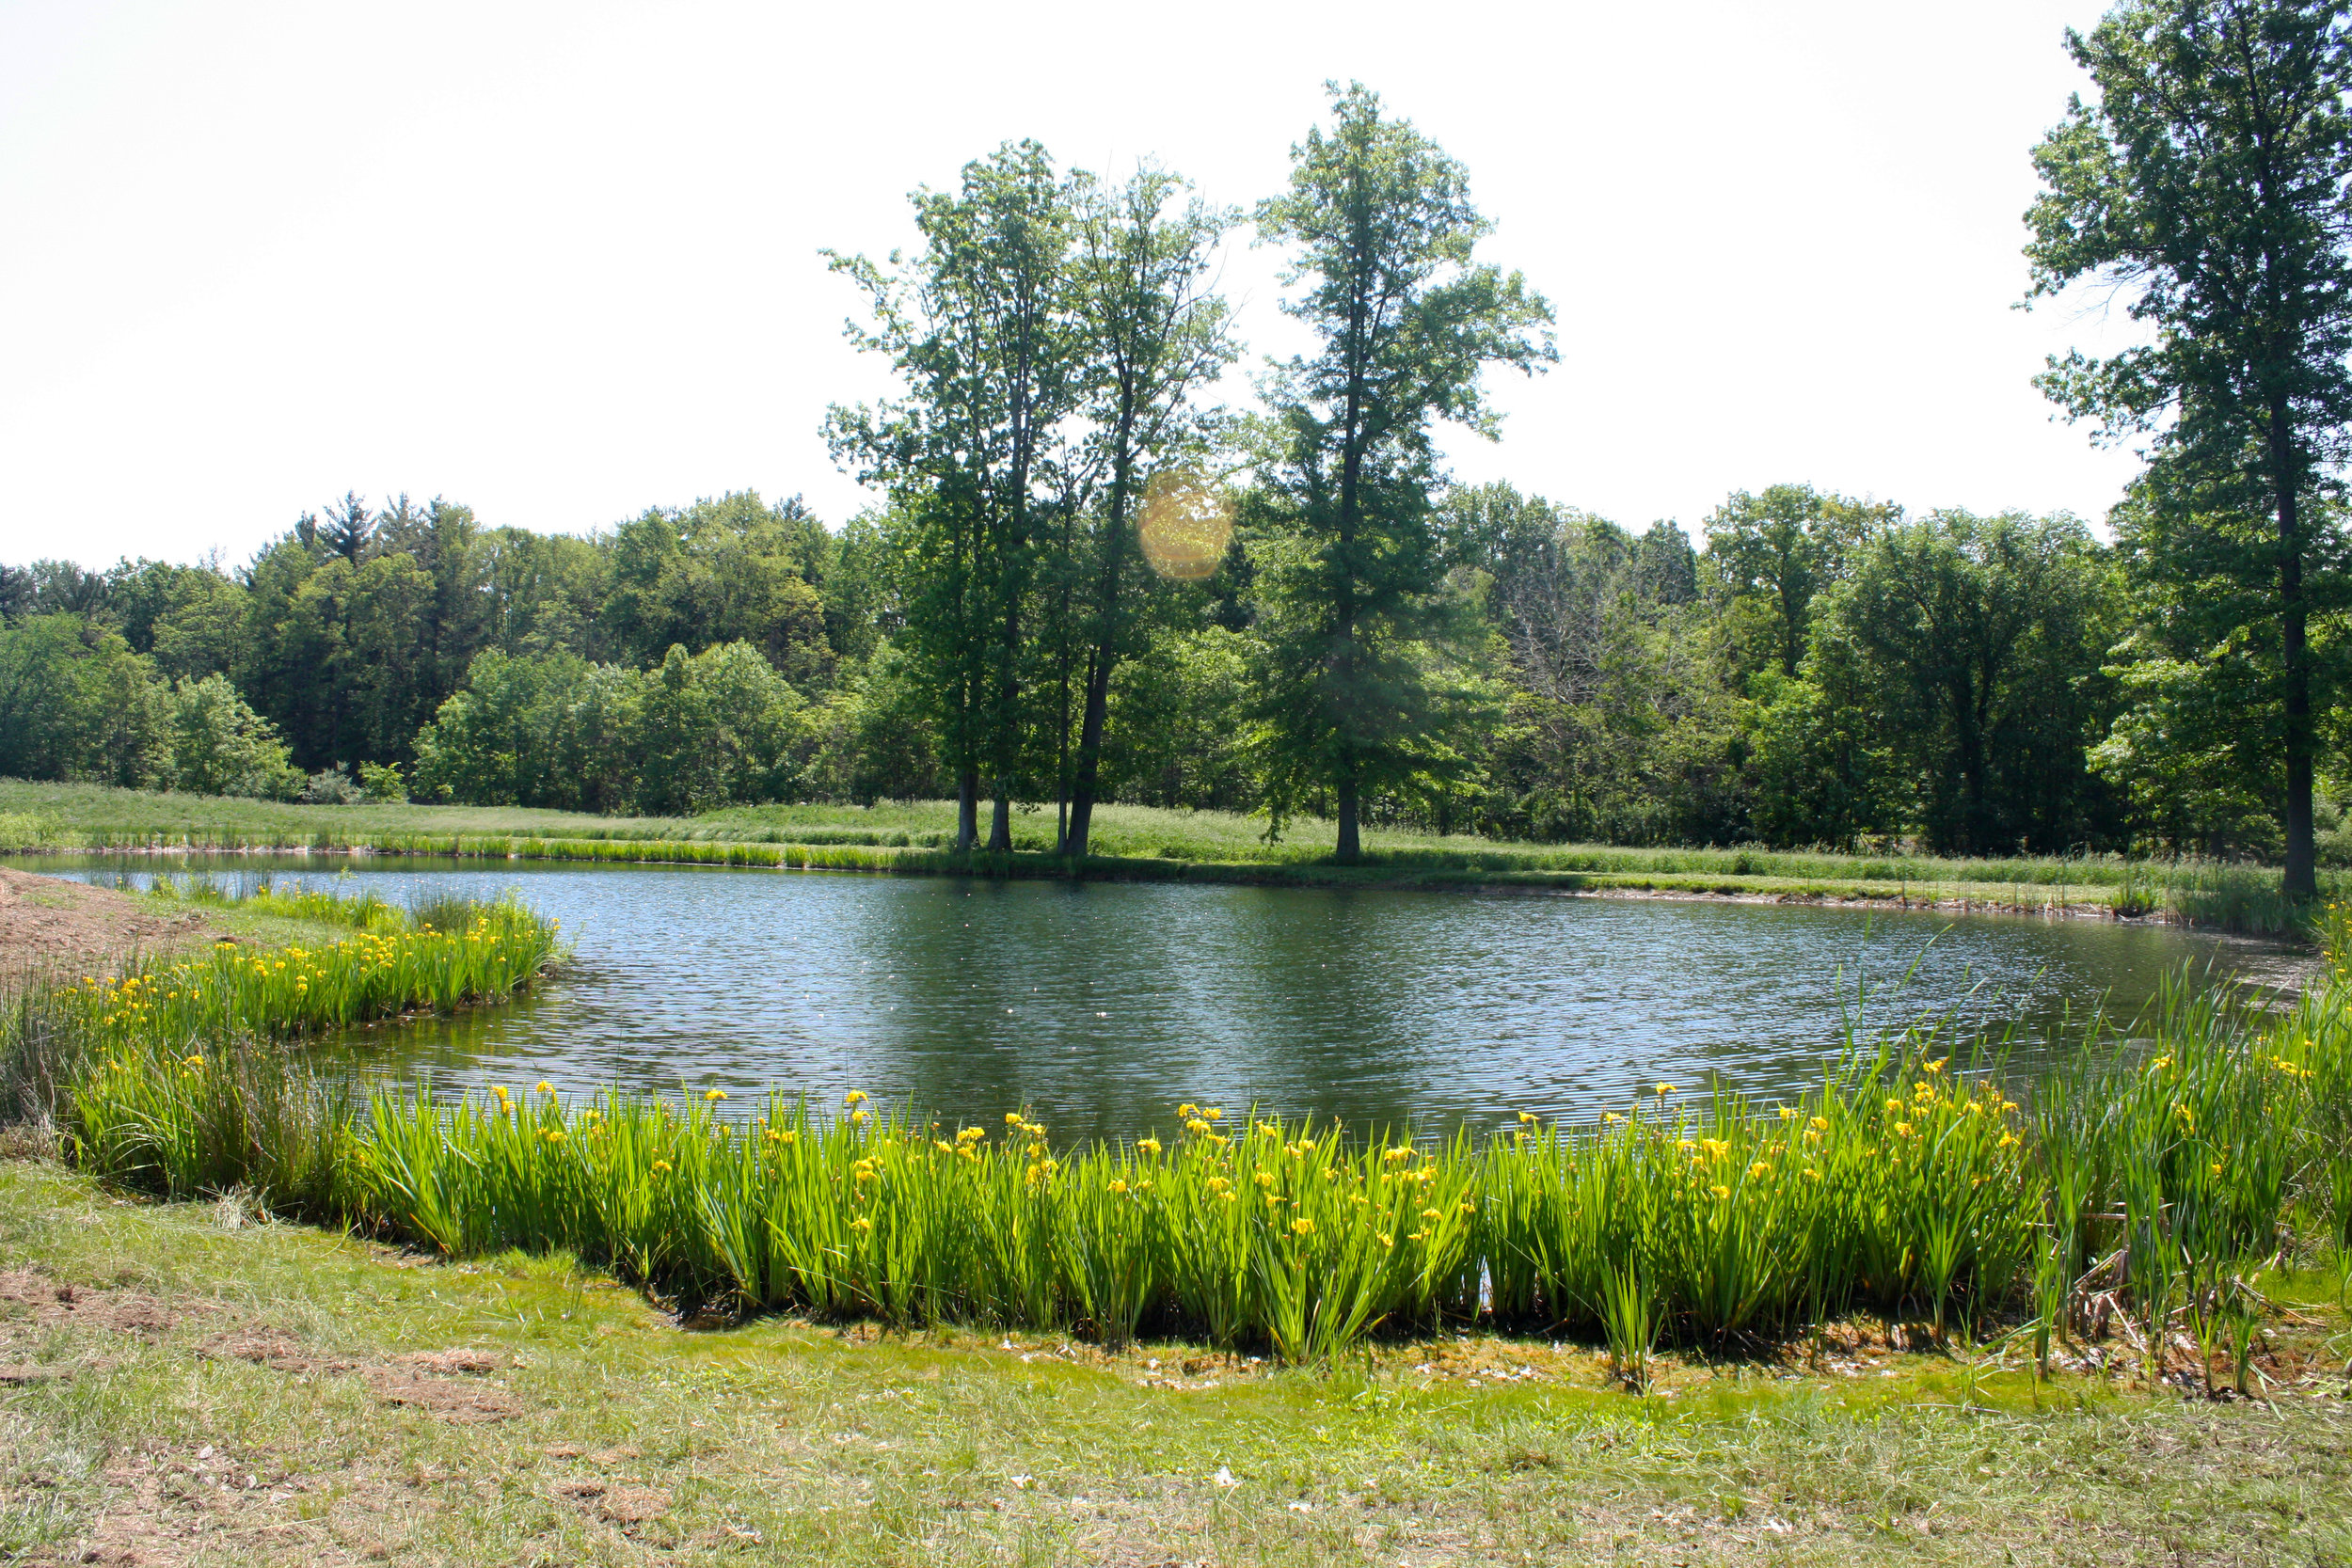 One of the ponds at Royal Oaks